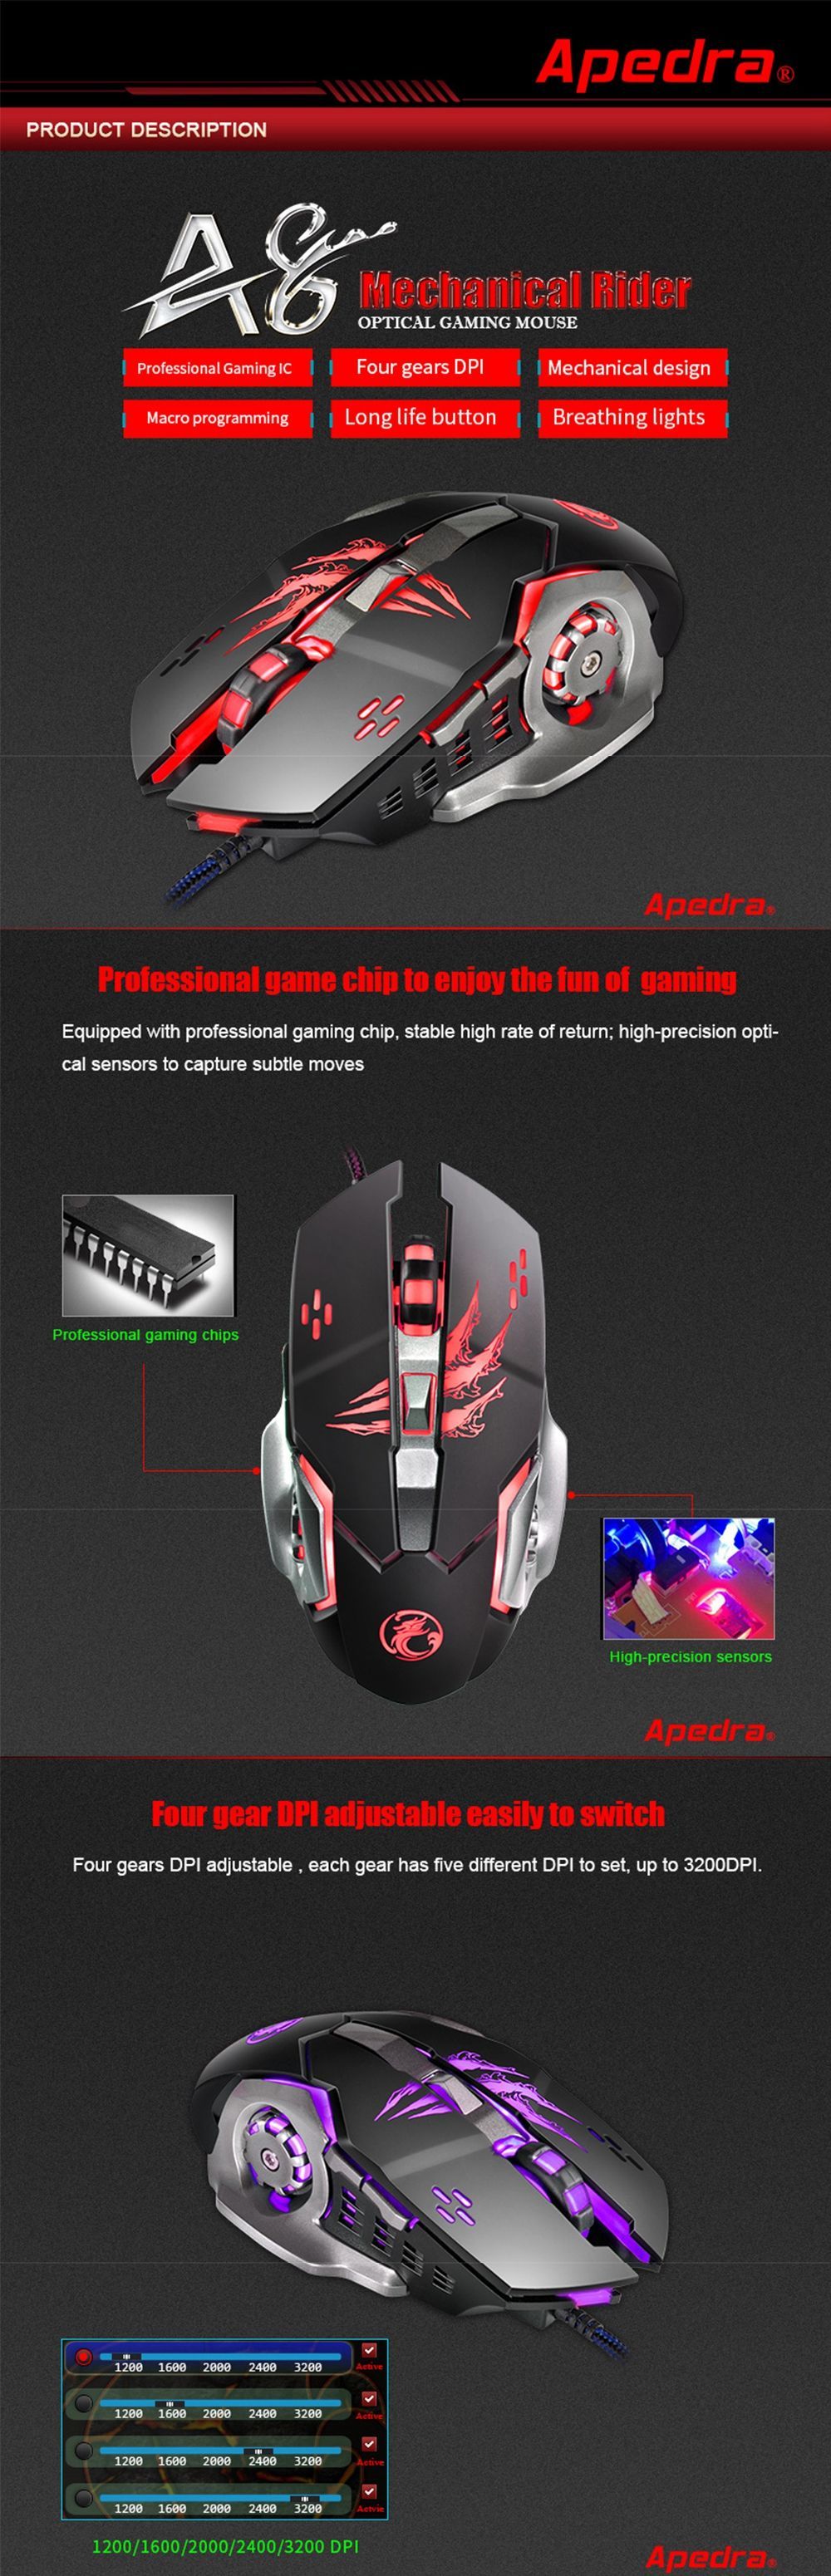 APEDRA-A8-3200DPI-6-Buttons-4-Colors-LED-Optical-USB-Wired-Mouse-Gaming-Mouse-for-PC-1577657